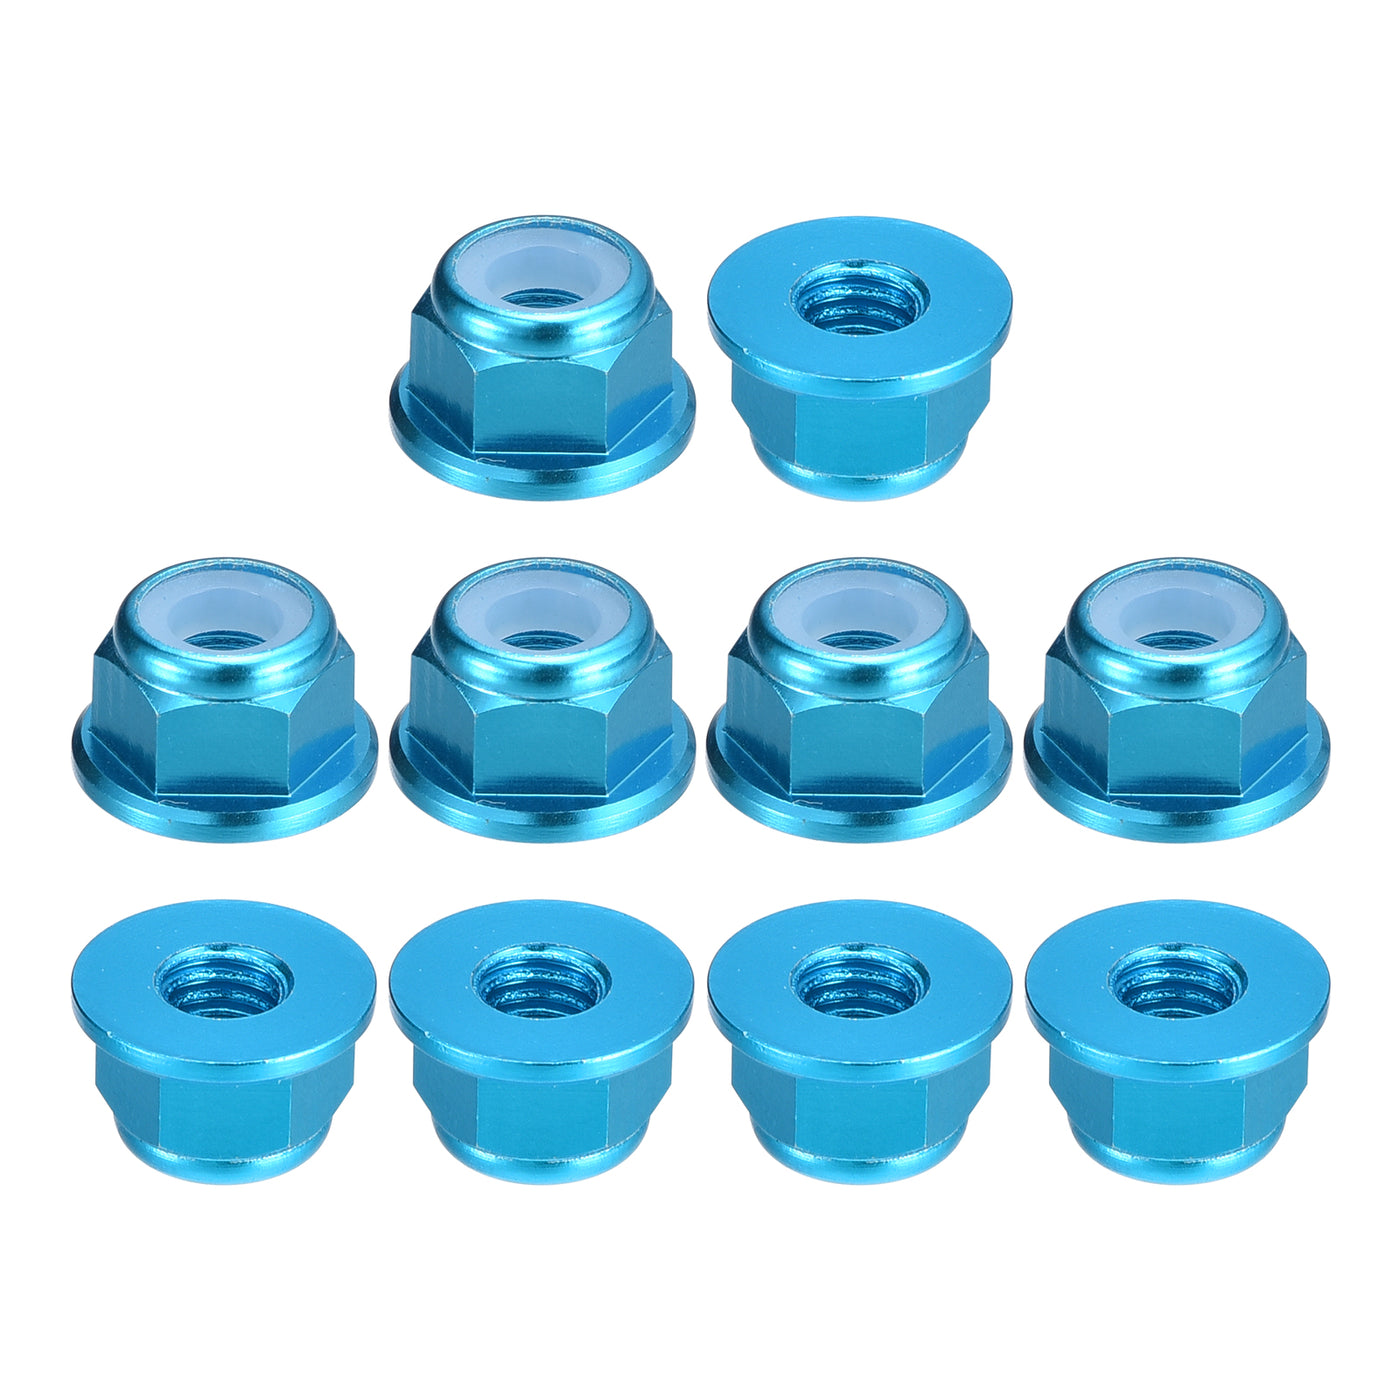 uxcell Uxcell Nylon Insert Hex Lock Nuts, 10pcs - M4 x 0.7mm Aluminum Alloy Self-Locking Nut, Anodizing Flange Lock Nut for Fasteners (Sky Blue)